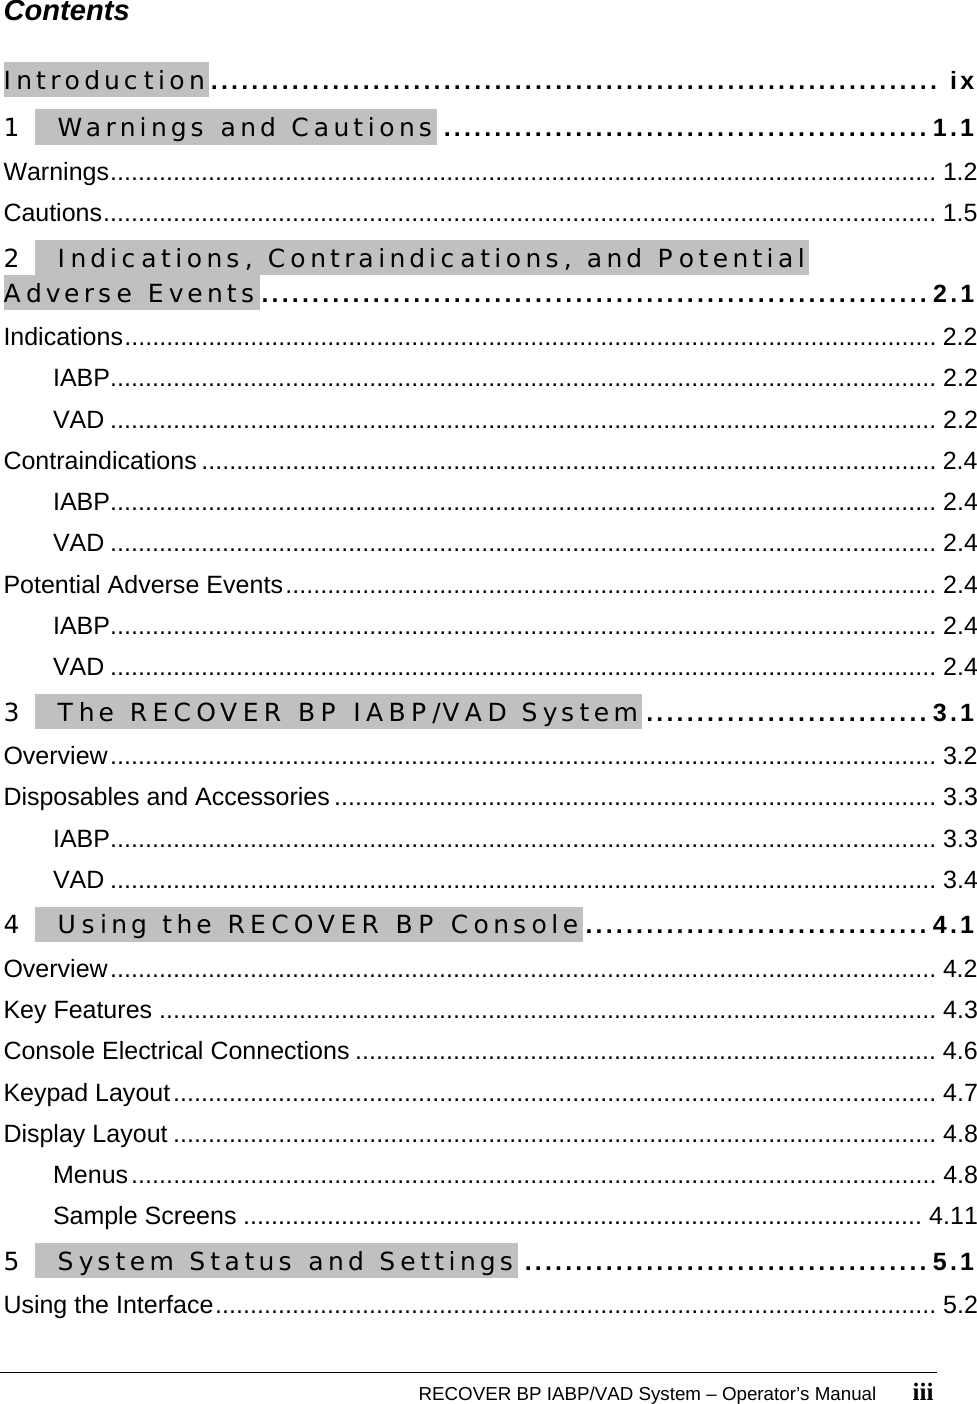   RECOVER BP IABP/VAD System – Operator’s Manual       iii Contents  Introduction........................................................................ ix 1   Warnings and Cautions ................................................1.1 Warnings...................................................................................................................... 1.2 Cautions....................................................................................................................... 1.5 2   Indications, Contraindications, and Potential Adverse Events..................................................................2.1 Indications.................................................................................................................... 2.2 IABP...................................................................................................................... 2.2 VAD ...................................................................................................................... 2.2 Contraindications ......................................................................................................... 2.4 IABP...................................................................................................................... 2.4 VAD ...................................................................................................................... 2.4 Potential Adverse Events............................................................................................. 2.4 IABP...................................................................................................................... 2.4 VAD ...................................................................................................................... 2.4 3   The RECOVER BP IABP/VAD System............................3.1 Overview...................................................................................................................... 3.2 Disposables and Accessories ...................................................................................... 3.3 IABP...................................................................................................................... 3.3 VAD ...................................................................................................................... 3.4 4   Using the RECOVER BP Console..................................4.1 Overview...................................................................................................................... 4.2 Key Features ............................................................................................................... 4.3 Console Electrical Connections ................................................................................... 4.6 Keypad Layout............................................................................................................. 4.7 Display Layout ............................................................................................................. 4.8 Menus................................................................................................................... 4.8 Sample Screens ................................................................................................. 4.11 5   System Status and Settings ........................................5.1 Using the Interface....................................................................................................... 5.2 